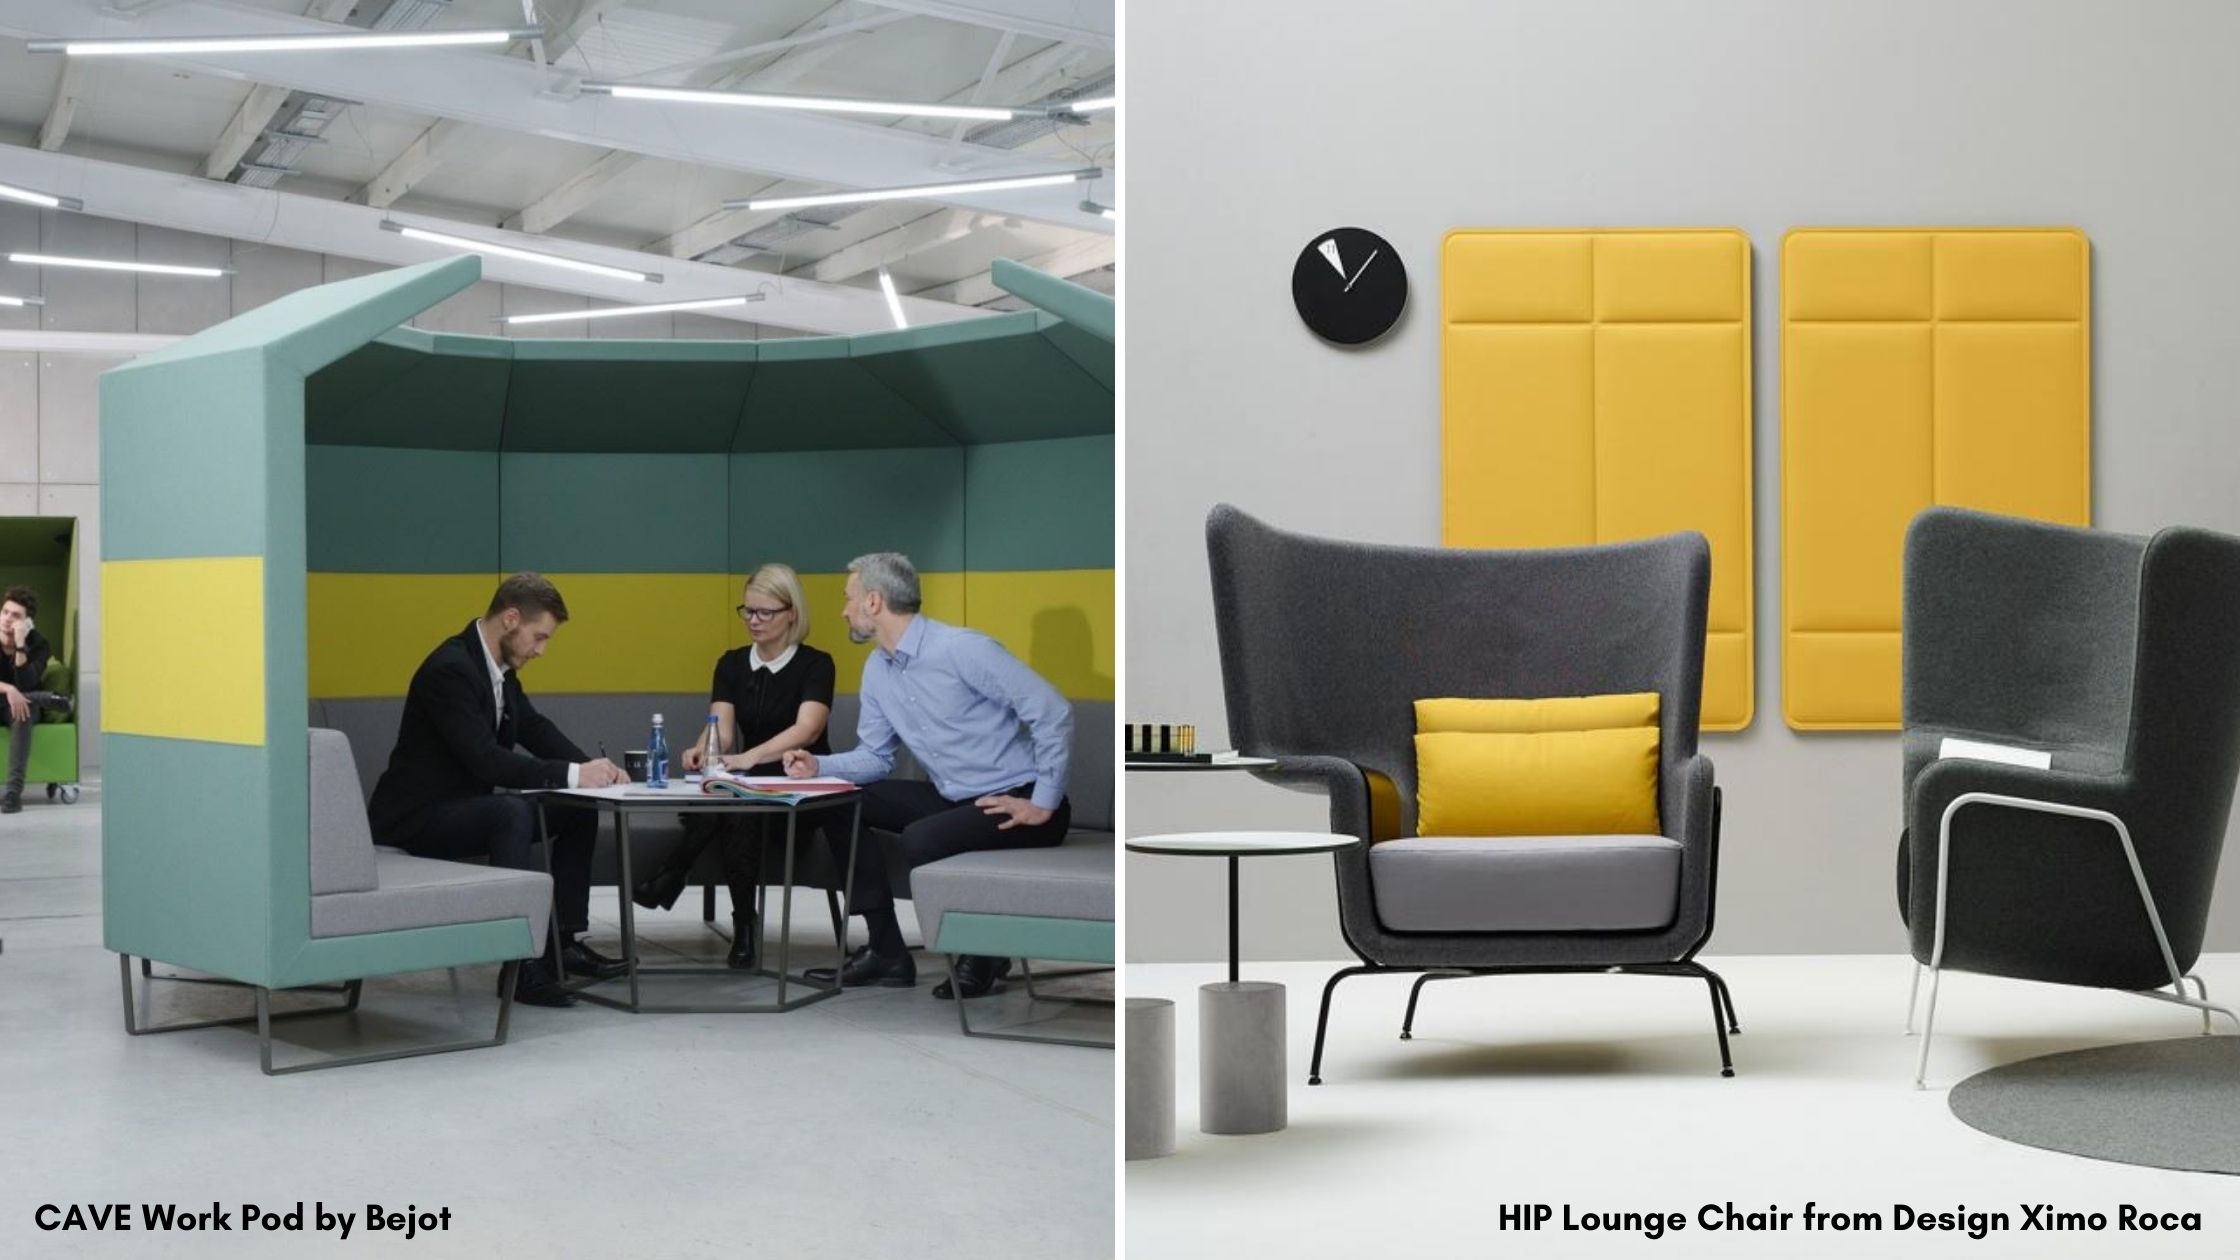 Multi-colour acoustic office caves and lounge chairs in an office workspace